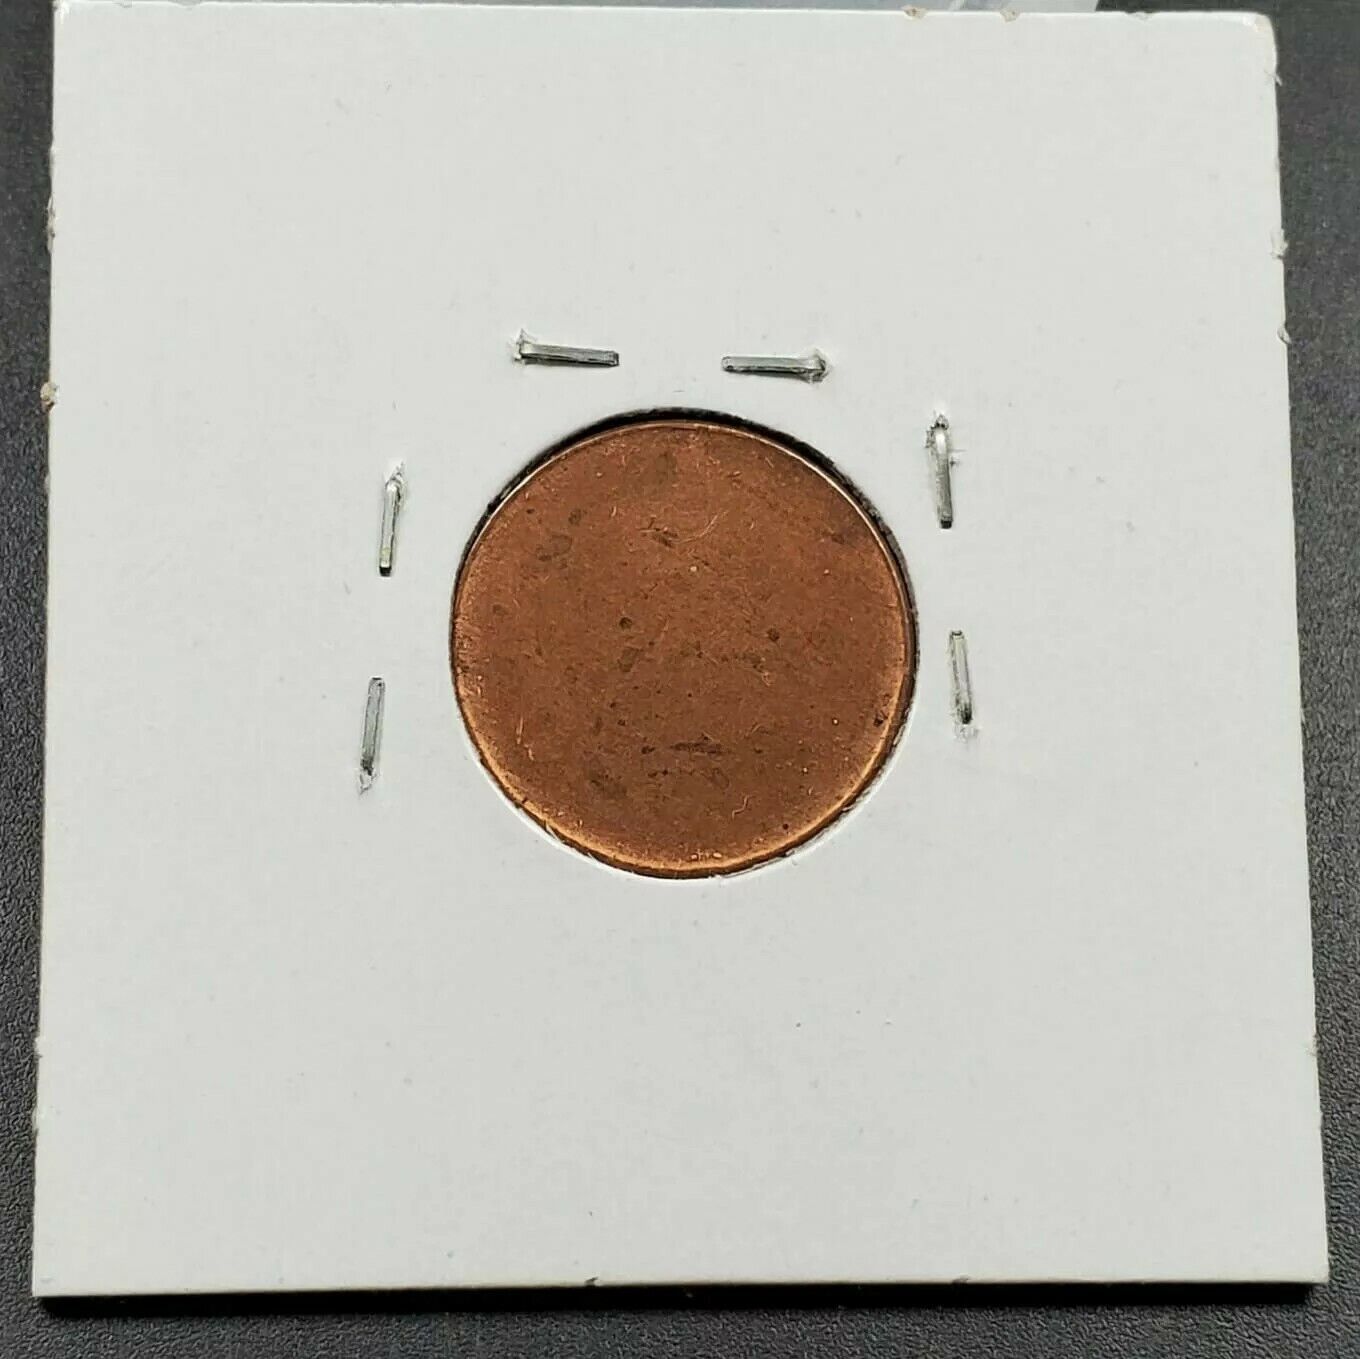 BLANK COPPER LINCOLN CENT PLANCHET ERROR VARIETY COIN ZINC COATED TYPE 3